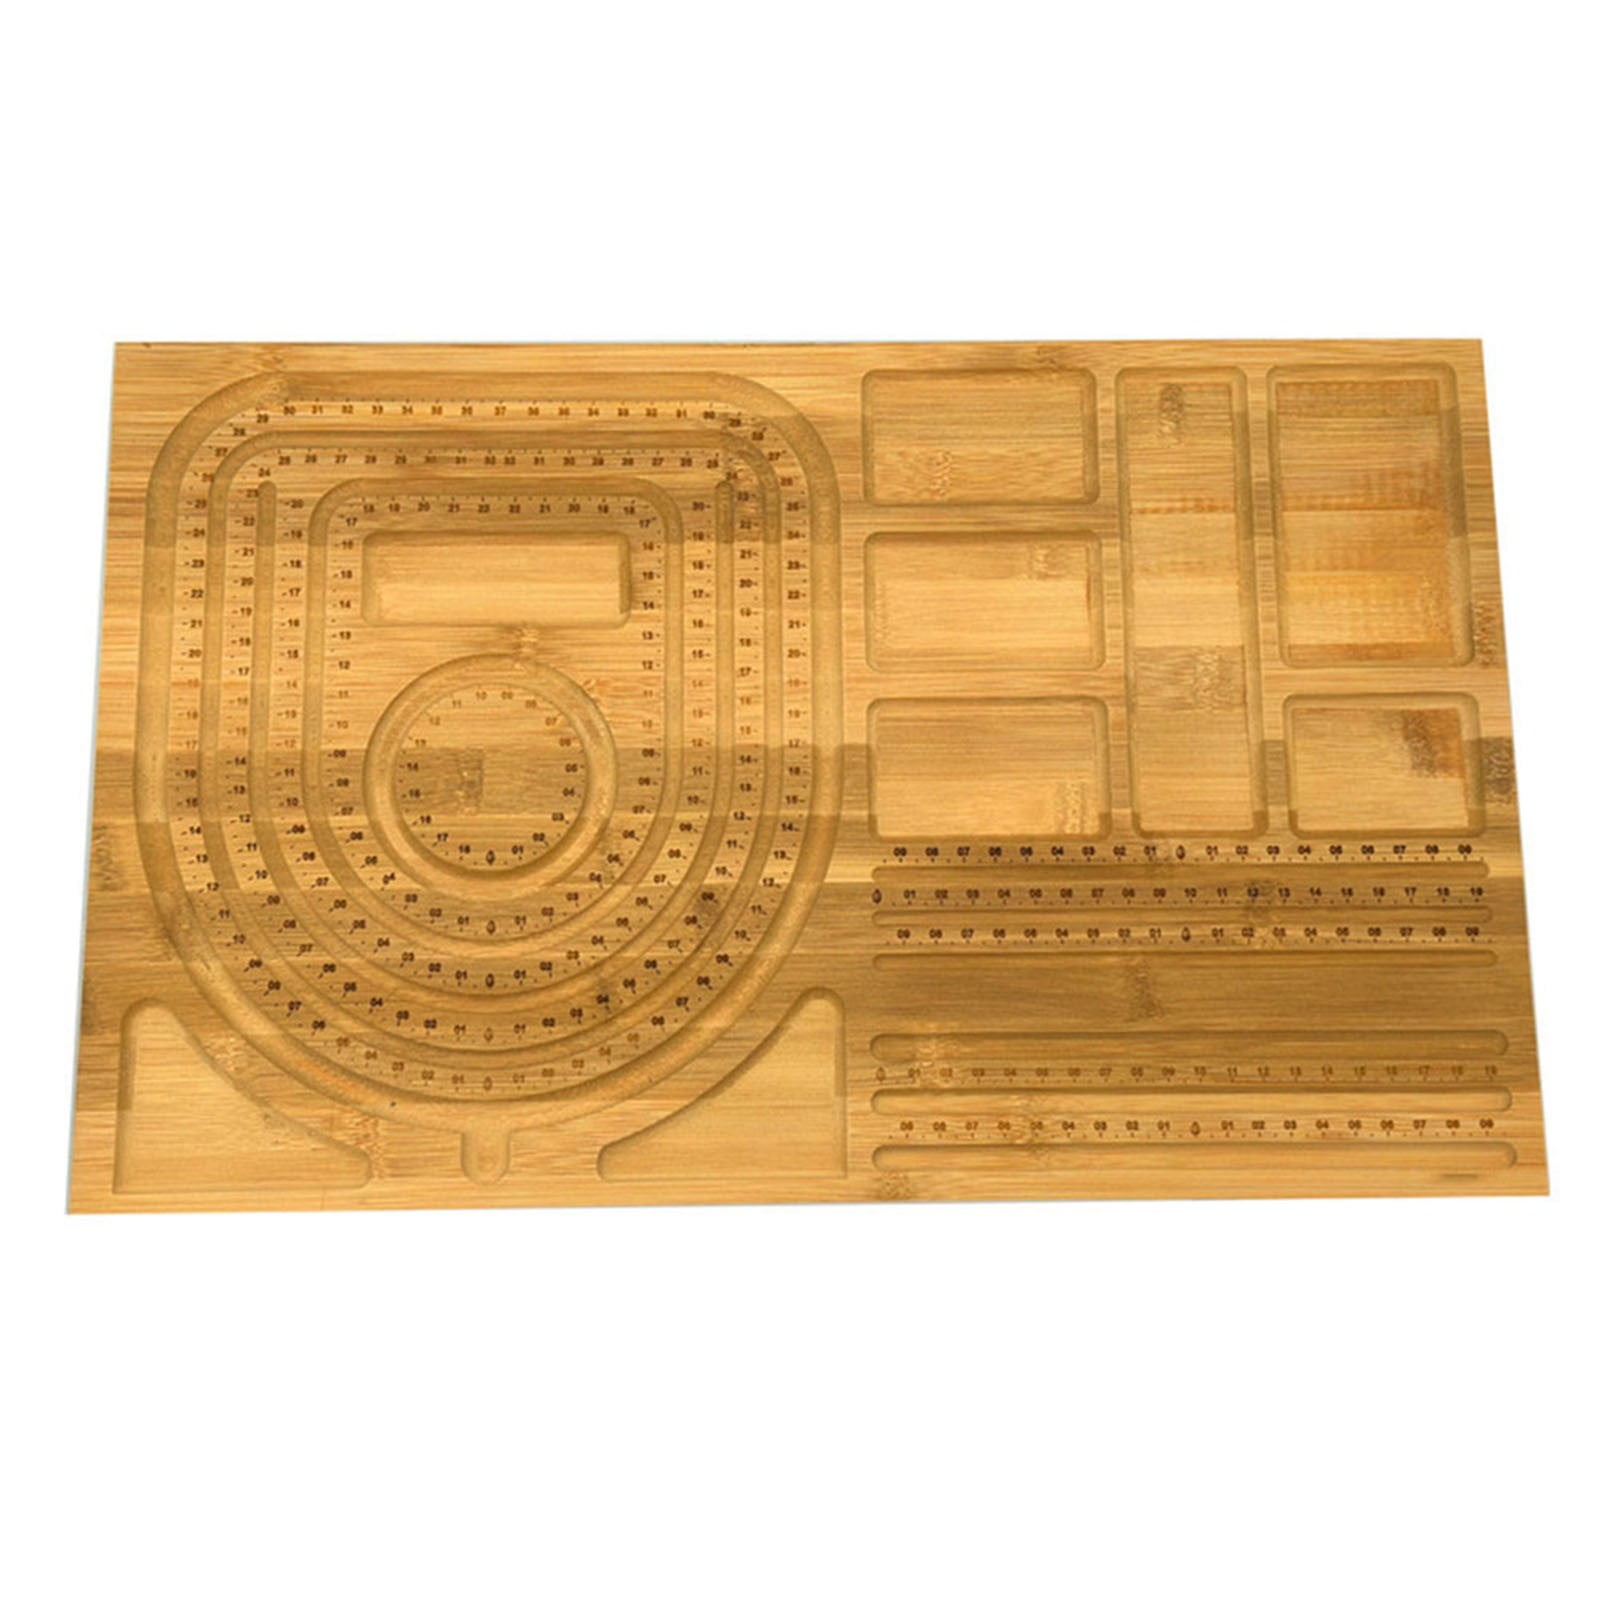  Fancemot Bead Board, Bamboo Bead Boards for Jewelry Making, Bracelet  Measurement Board and Beading Board with Engraved Dimensions and Storage  Grooves - Ideal Beadboard for Crafting : Arts, Crafts & Sewing